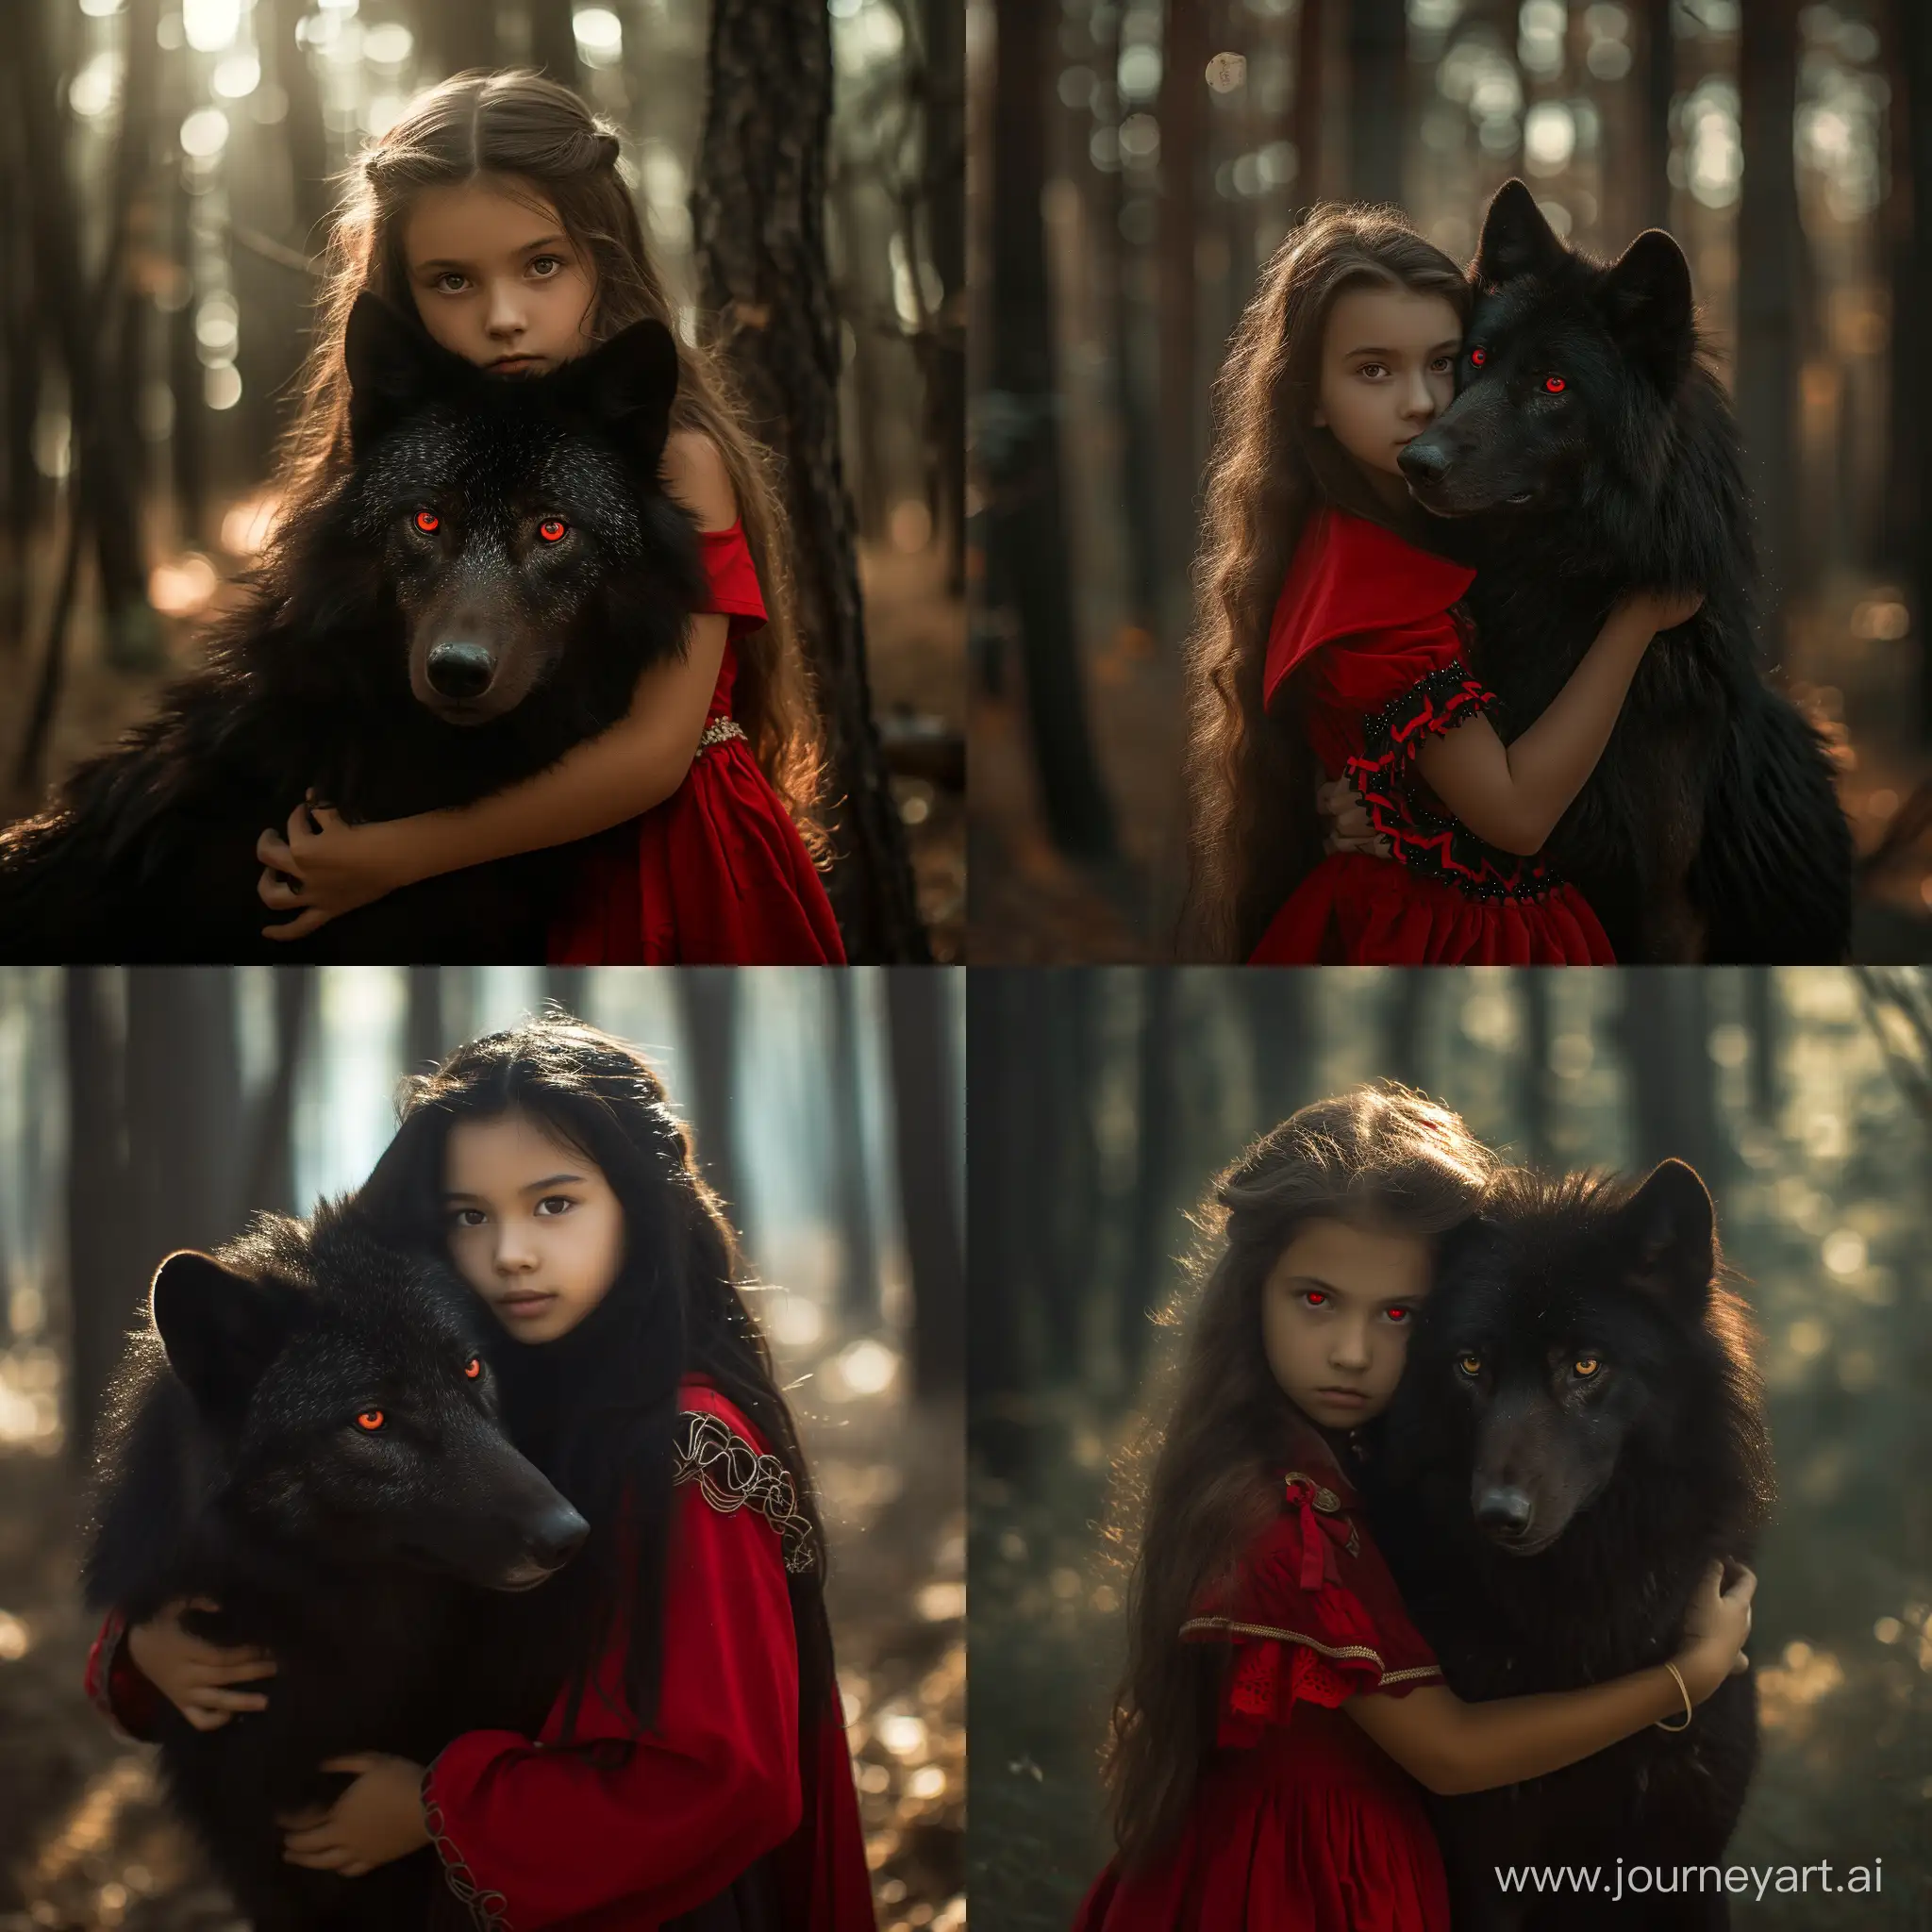 little red riding hood, pretty young girl, holds the black wolf in her arms, forest, light passing through the trees, wolf red eyes, aggresive wolf, the wolf bore its teeth as a warning, realistic Portrait Photography, high quality photograph, In the style of Luis royo —style raw